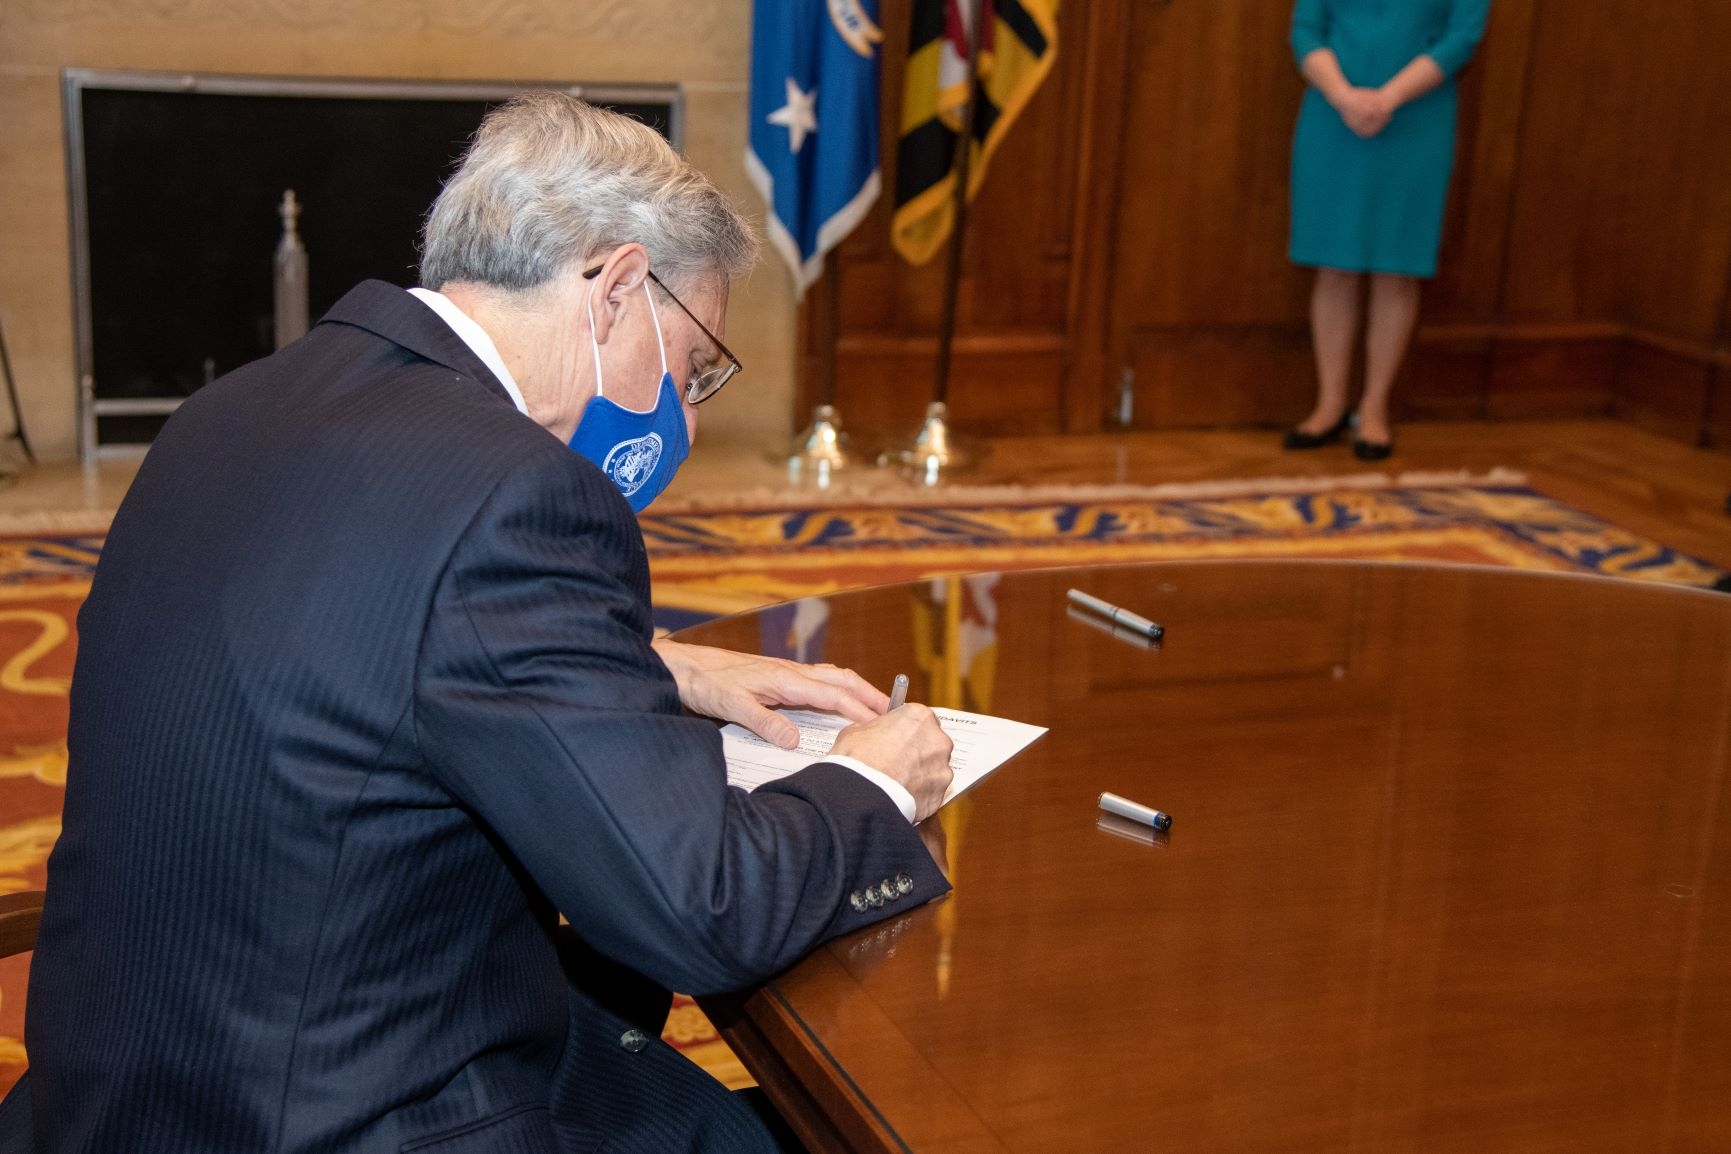 Judge Garland signs his oath of office as the 86th Attorney General of the United States.